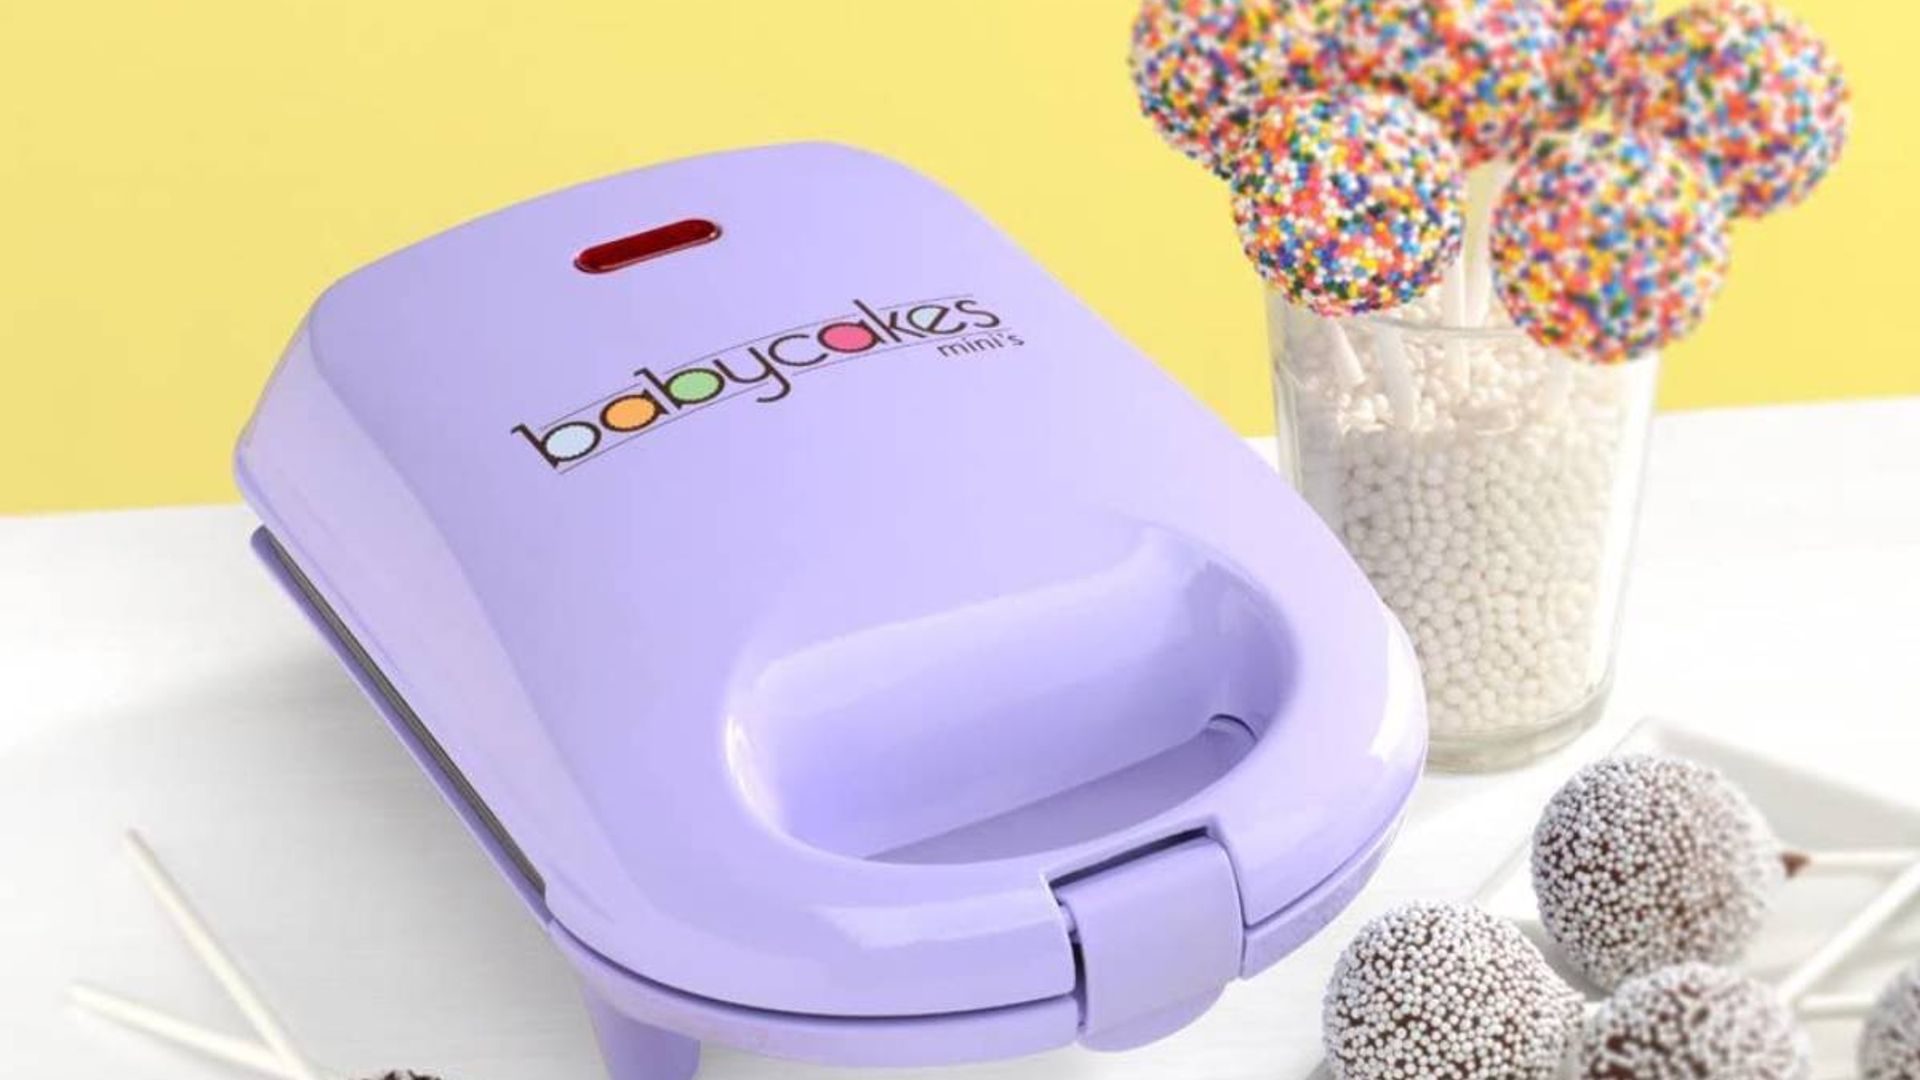 Amazon shoppers are going crazy over this mini cake pop maker - and it's perfect for Easter 